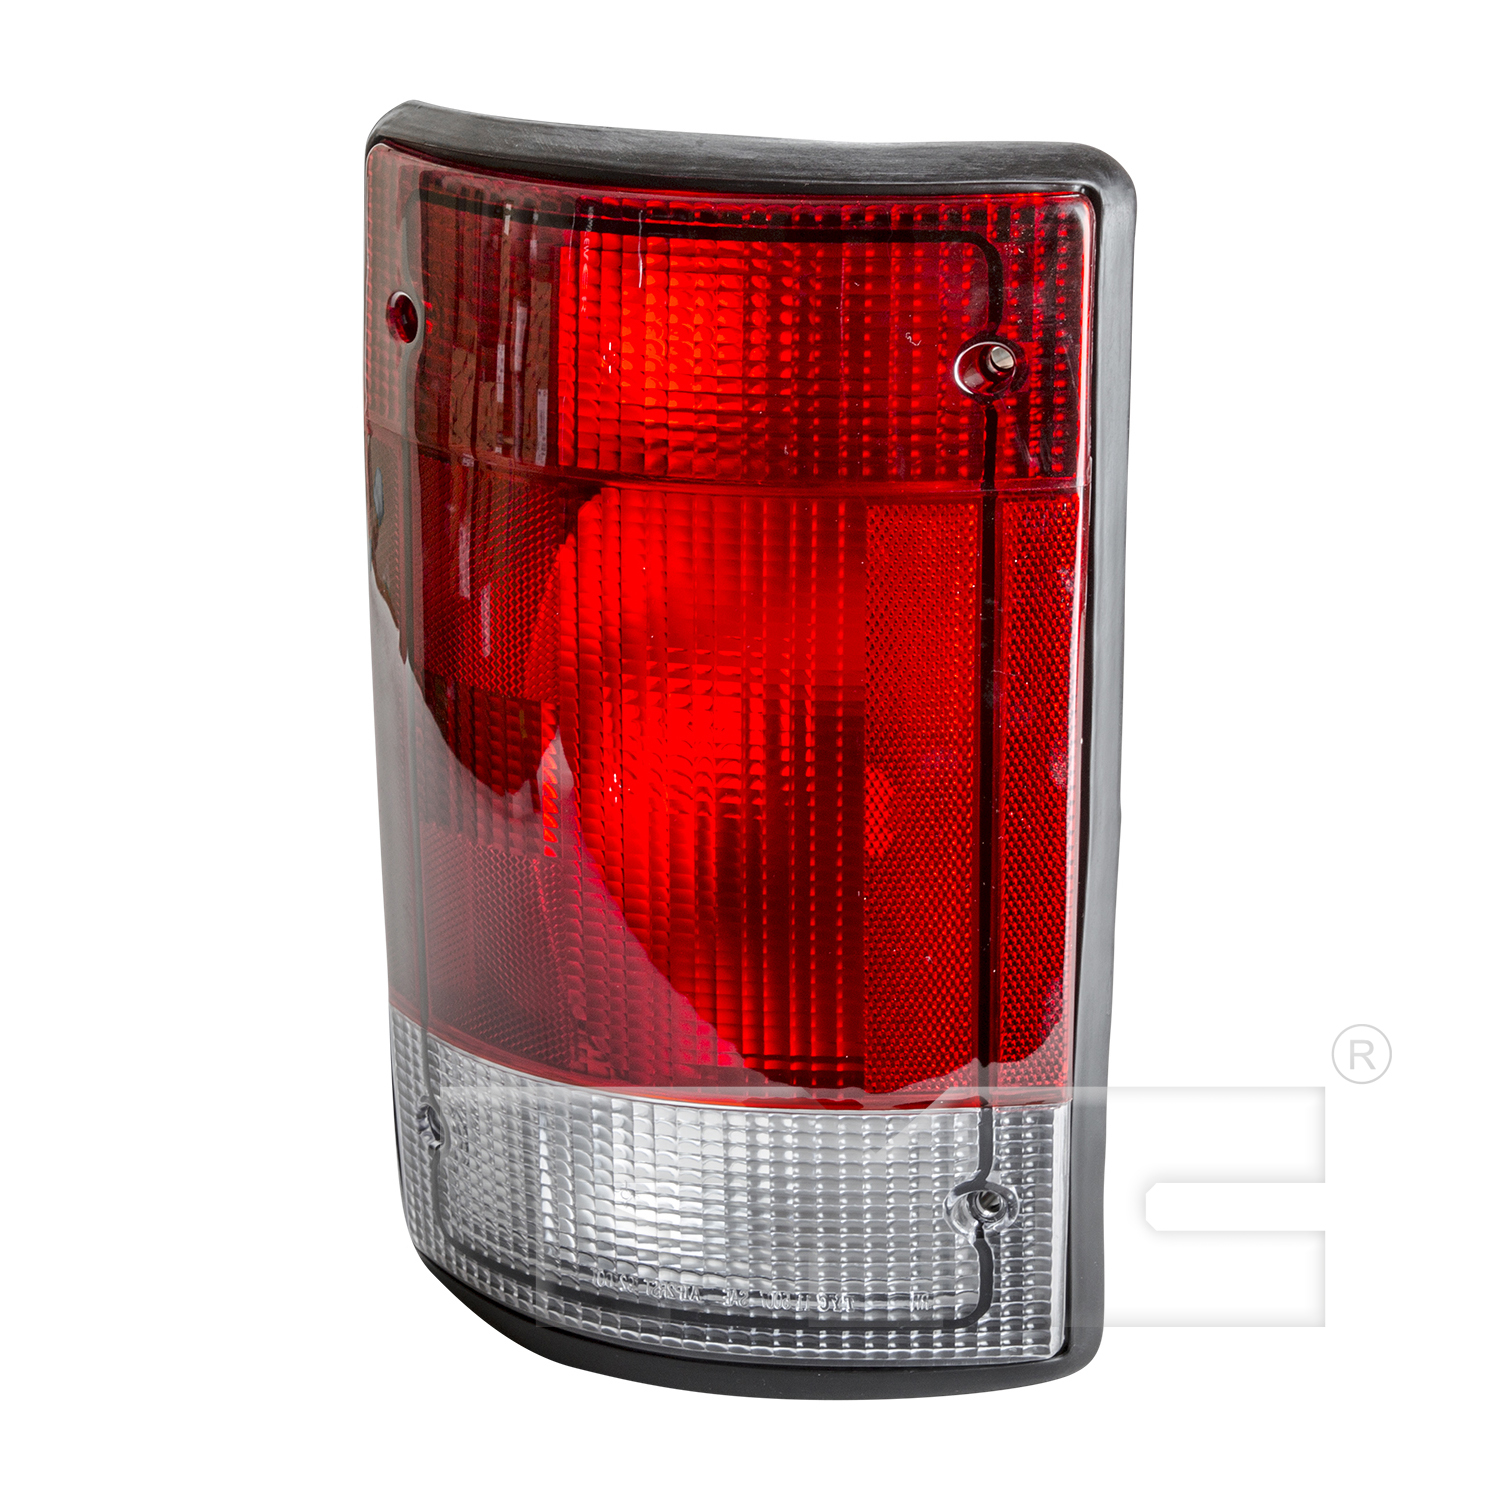 Aftermarket TAILLIGHTS for FORD - E-250 ECONOLINE, E-250 ECONOLINE,95-02,LT Taillamp assy